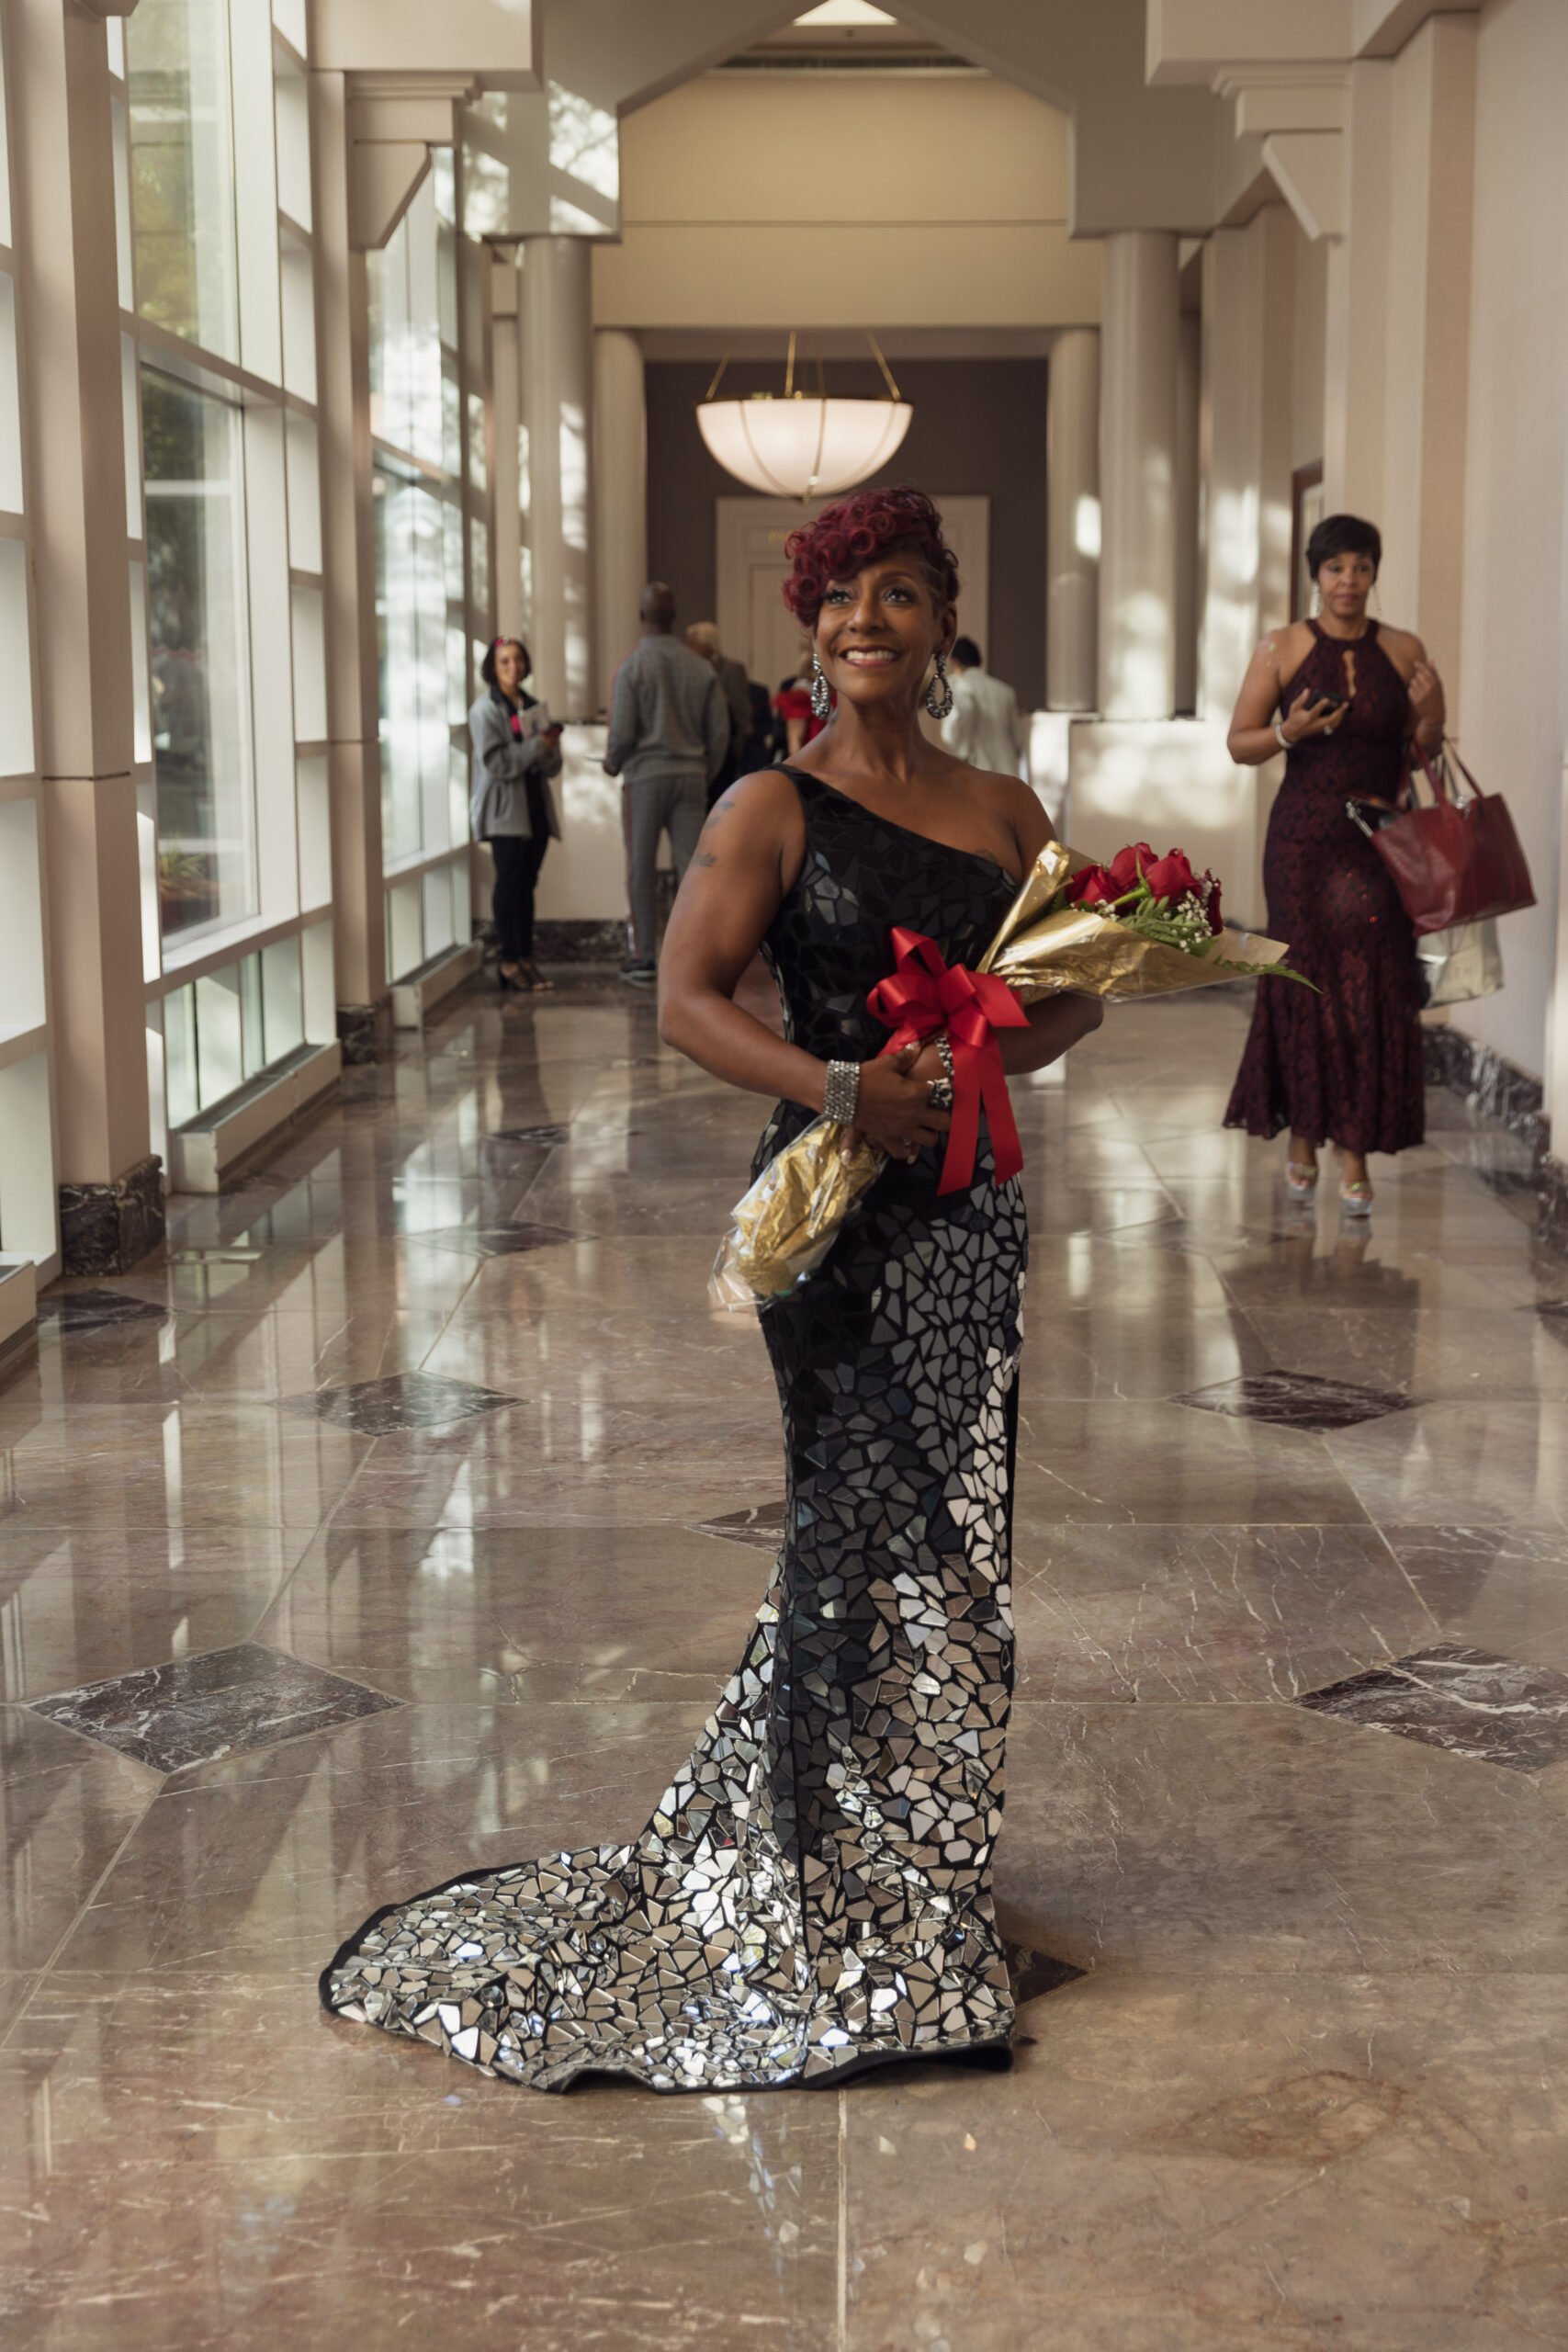 A Black woman in an elegant black gown with a silver mirrored mosaic around its skirts, holds a bunch of roses in her hands as she beams with pride, standing in an elegant tiled hallway.